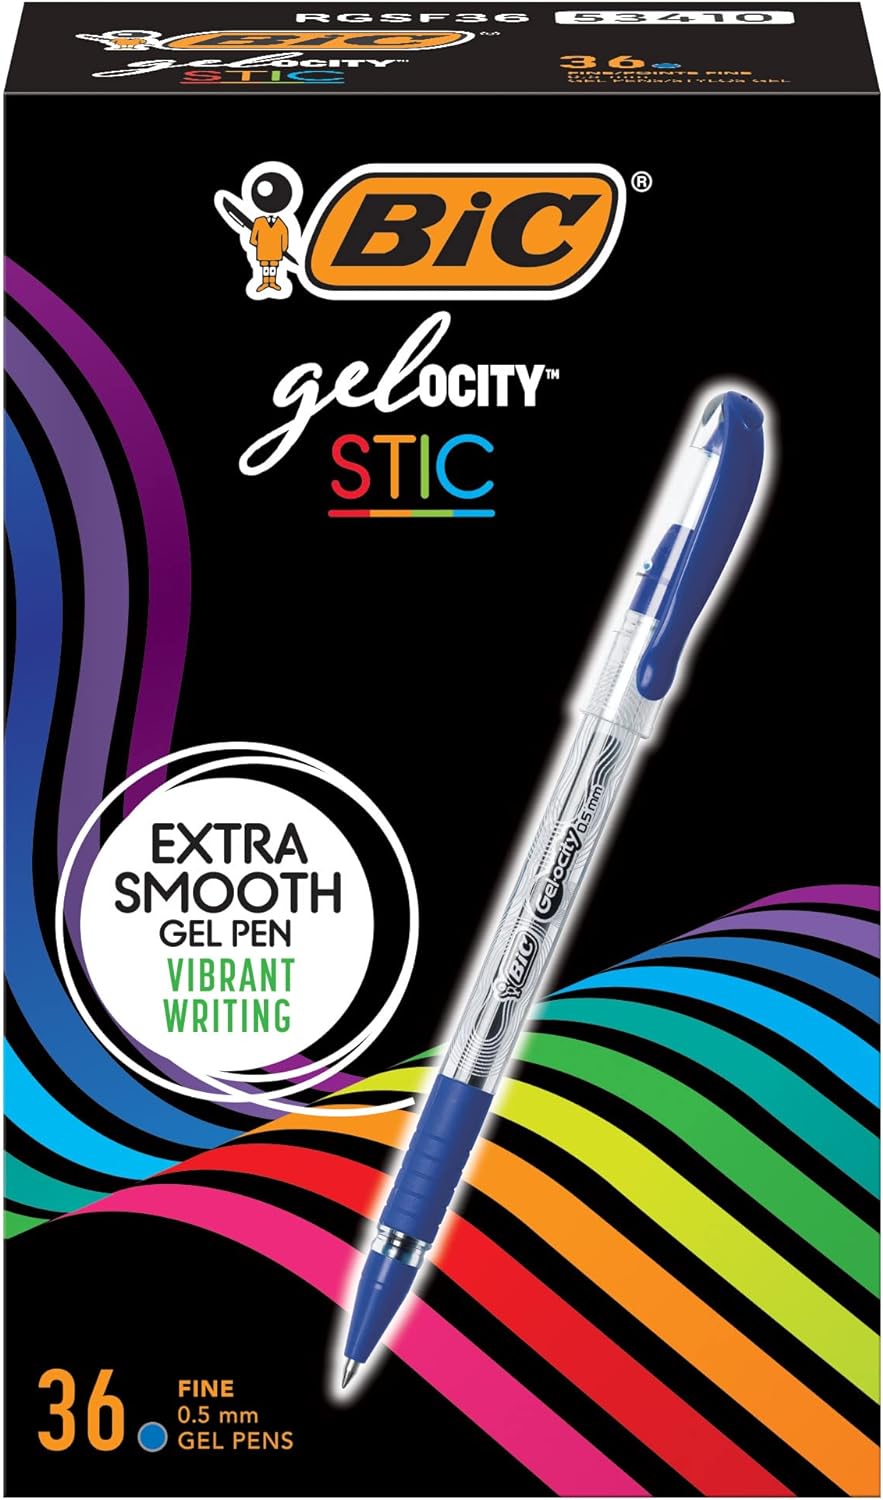 BIC Gel-ocity Smooth Gel Pen, Fine Point (0.5mm), Blue, For a Smooth, Effortless Writing Experience, 36-Count